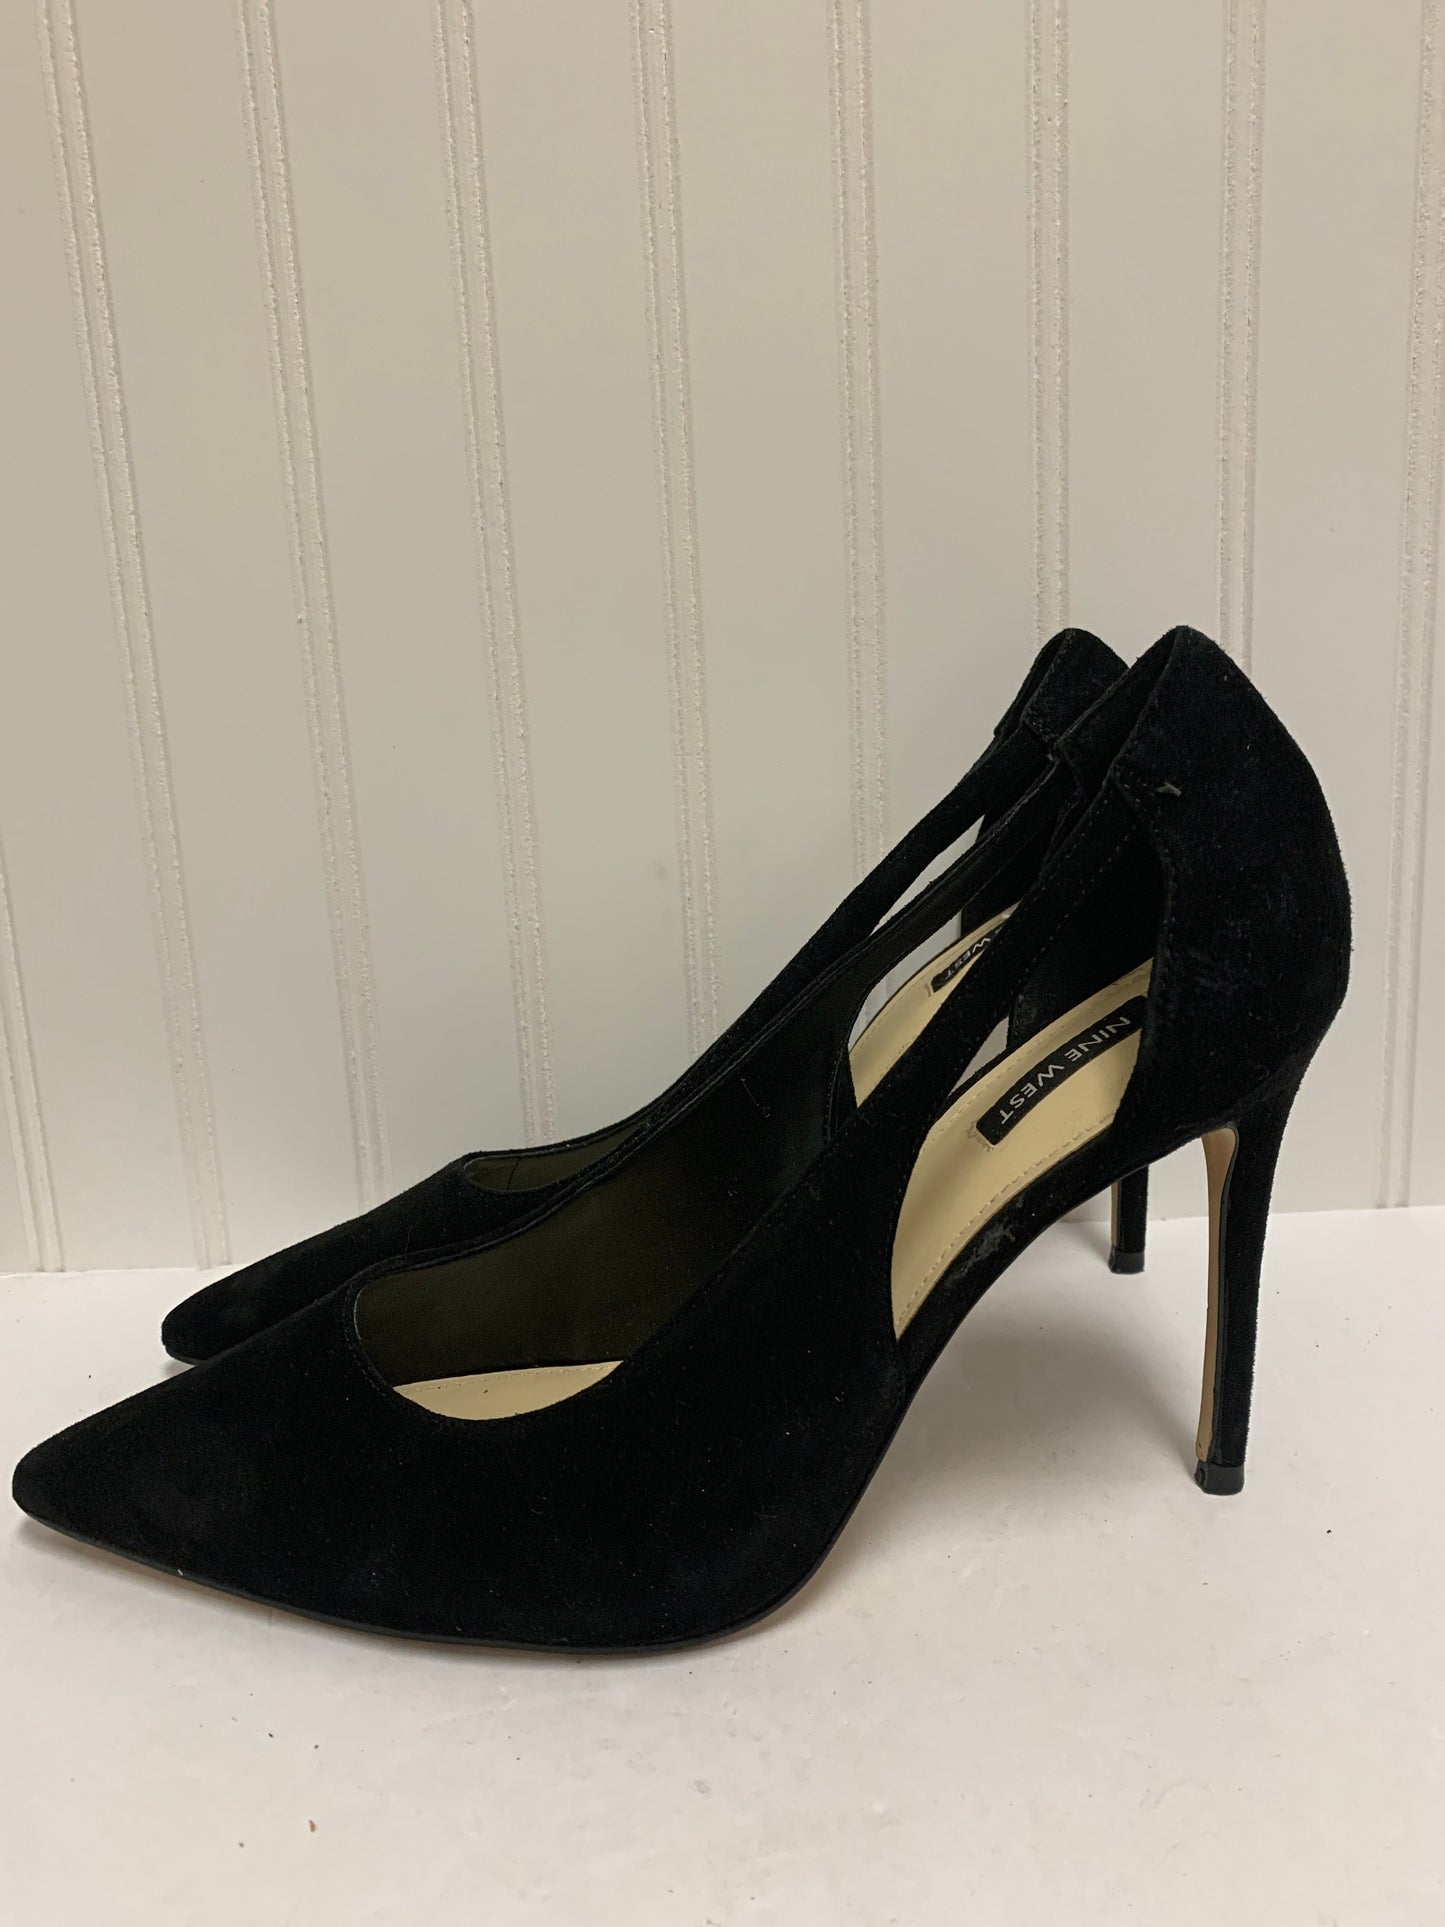 Shoes Heels Stiletto By Nine West  Size: 12